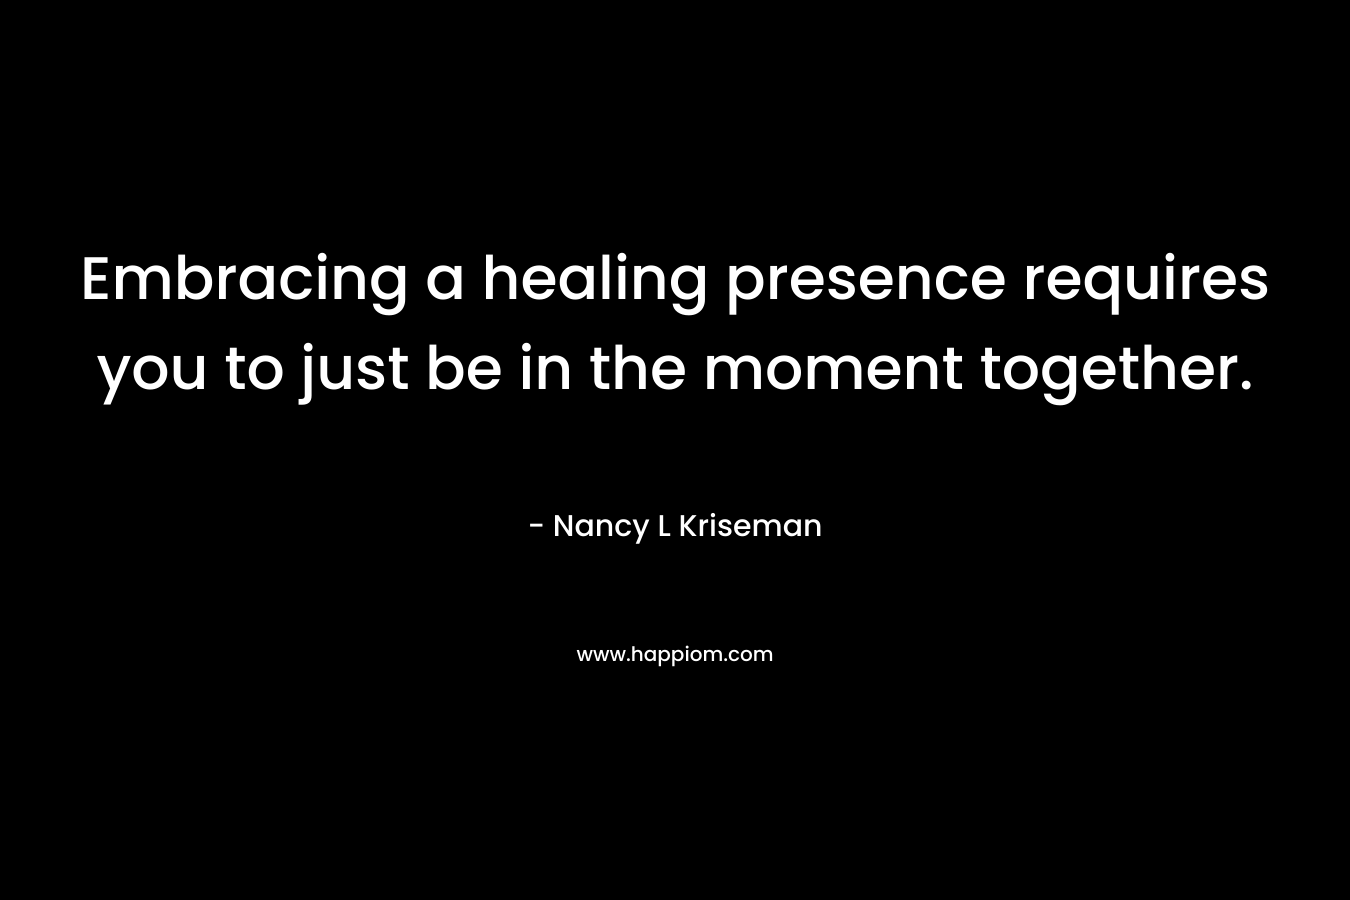 Embracing a healing presence requires you to just be in the moment together.